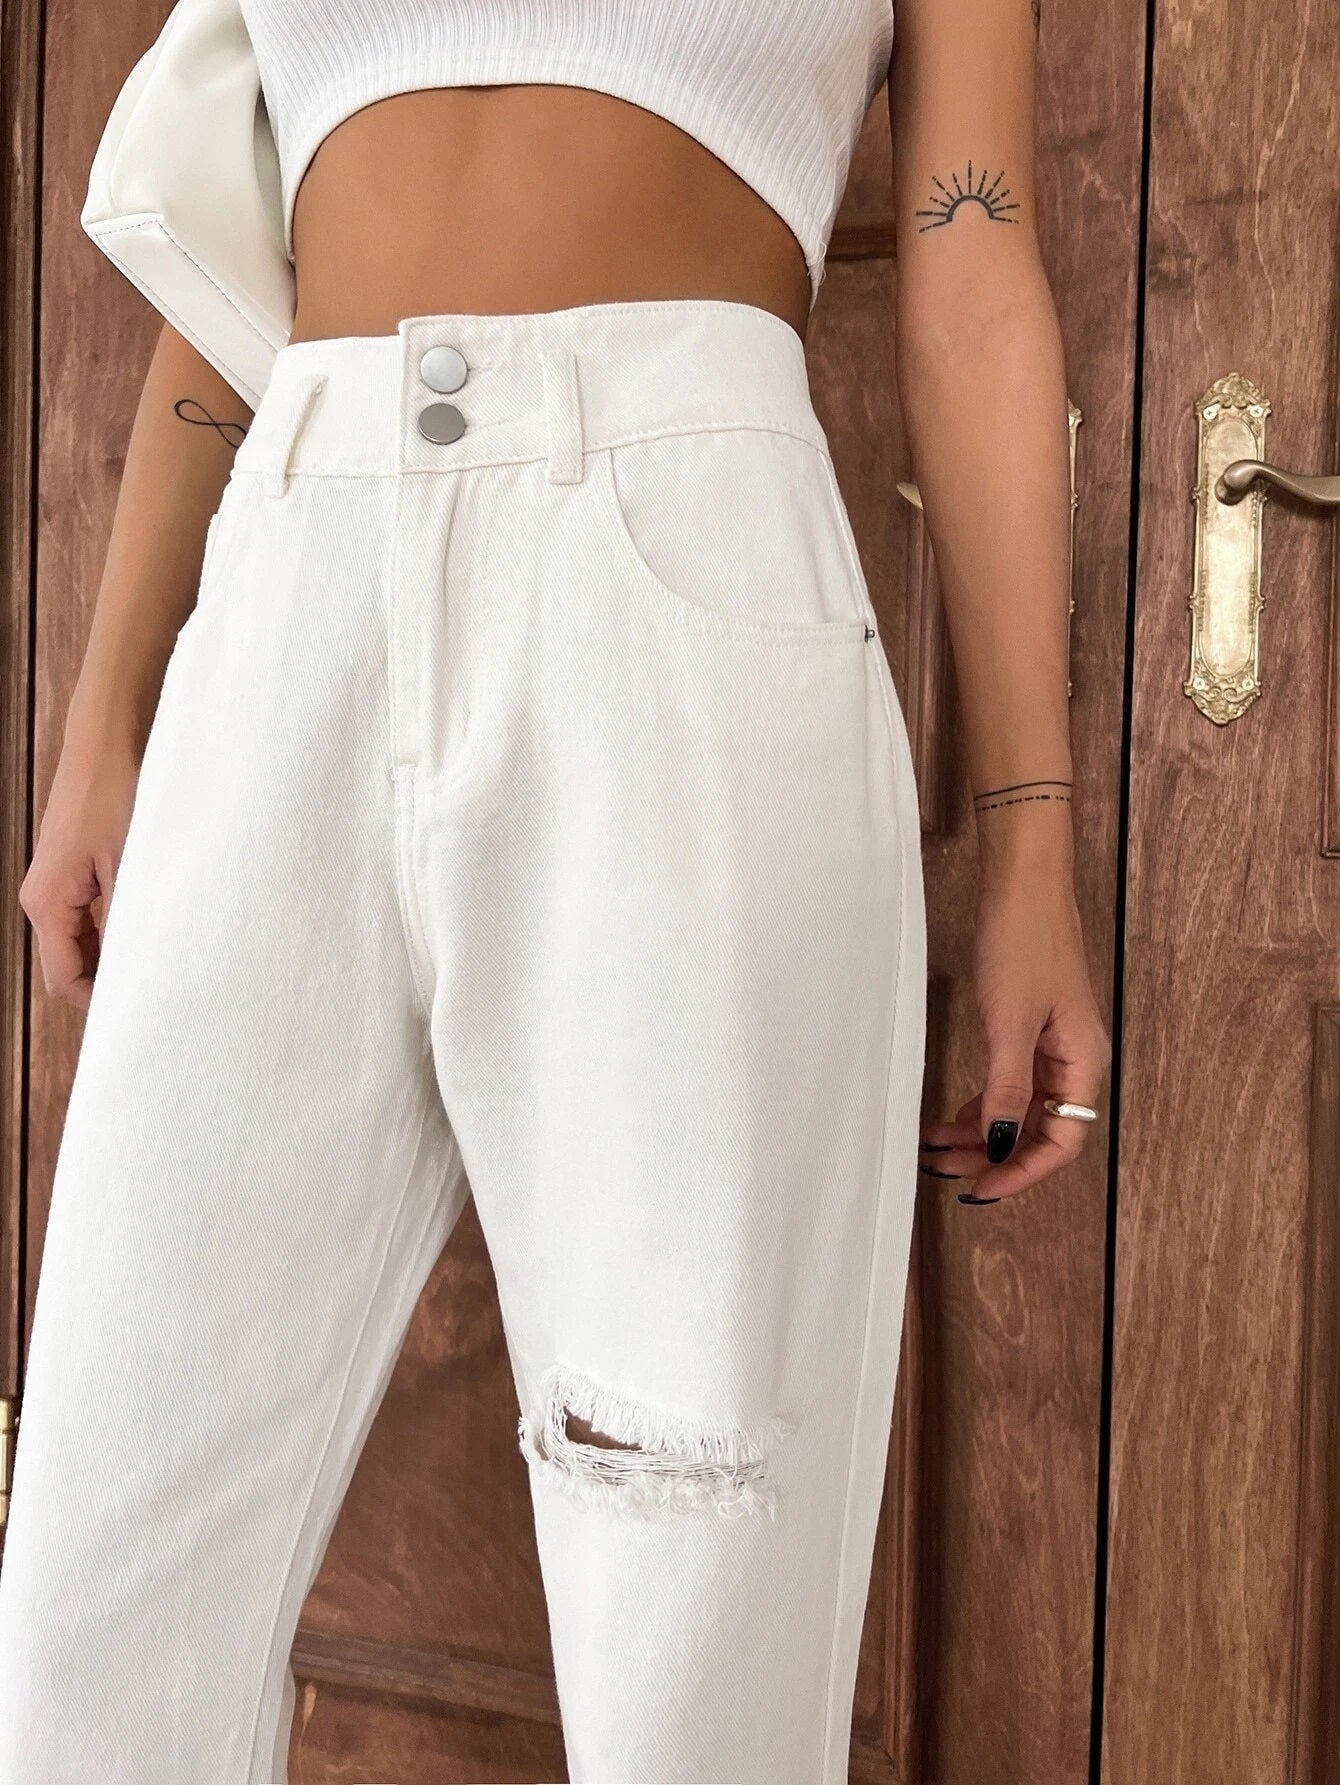 CM-BS199210 Women Casual Seoul Style High Waist Ripped Mom Fit Jeans - White